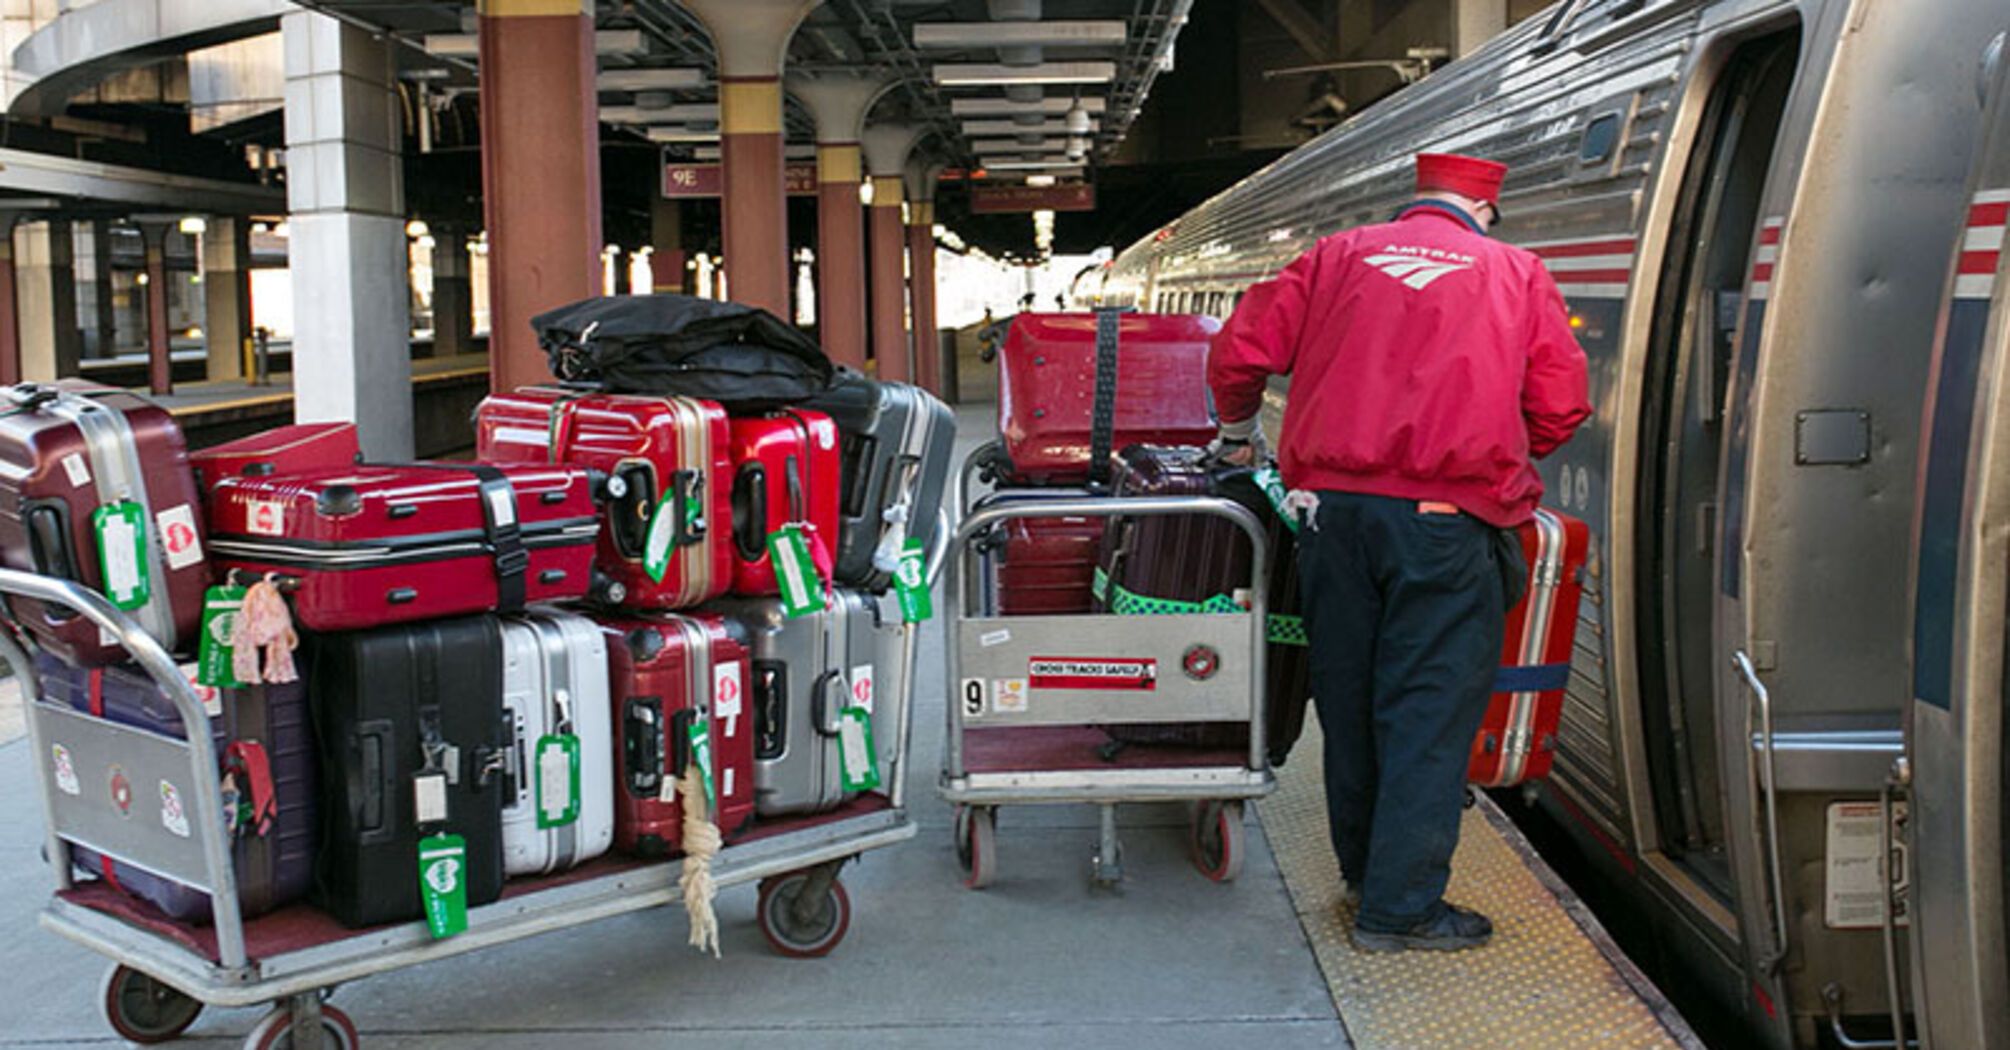 Lifehack on Amtrak routes: free luggage assistance that few people know about